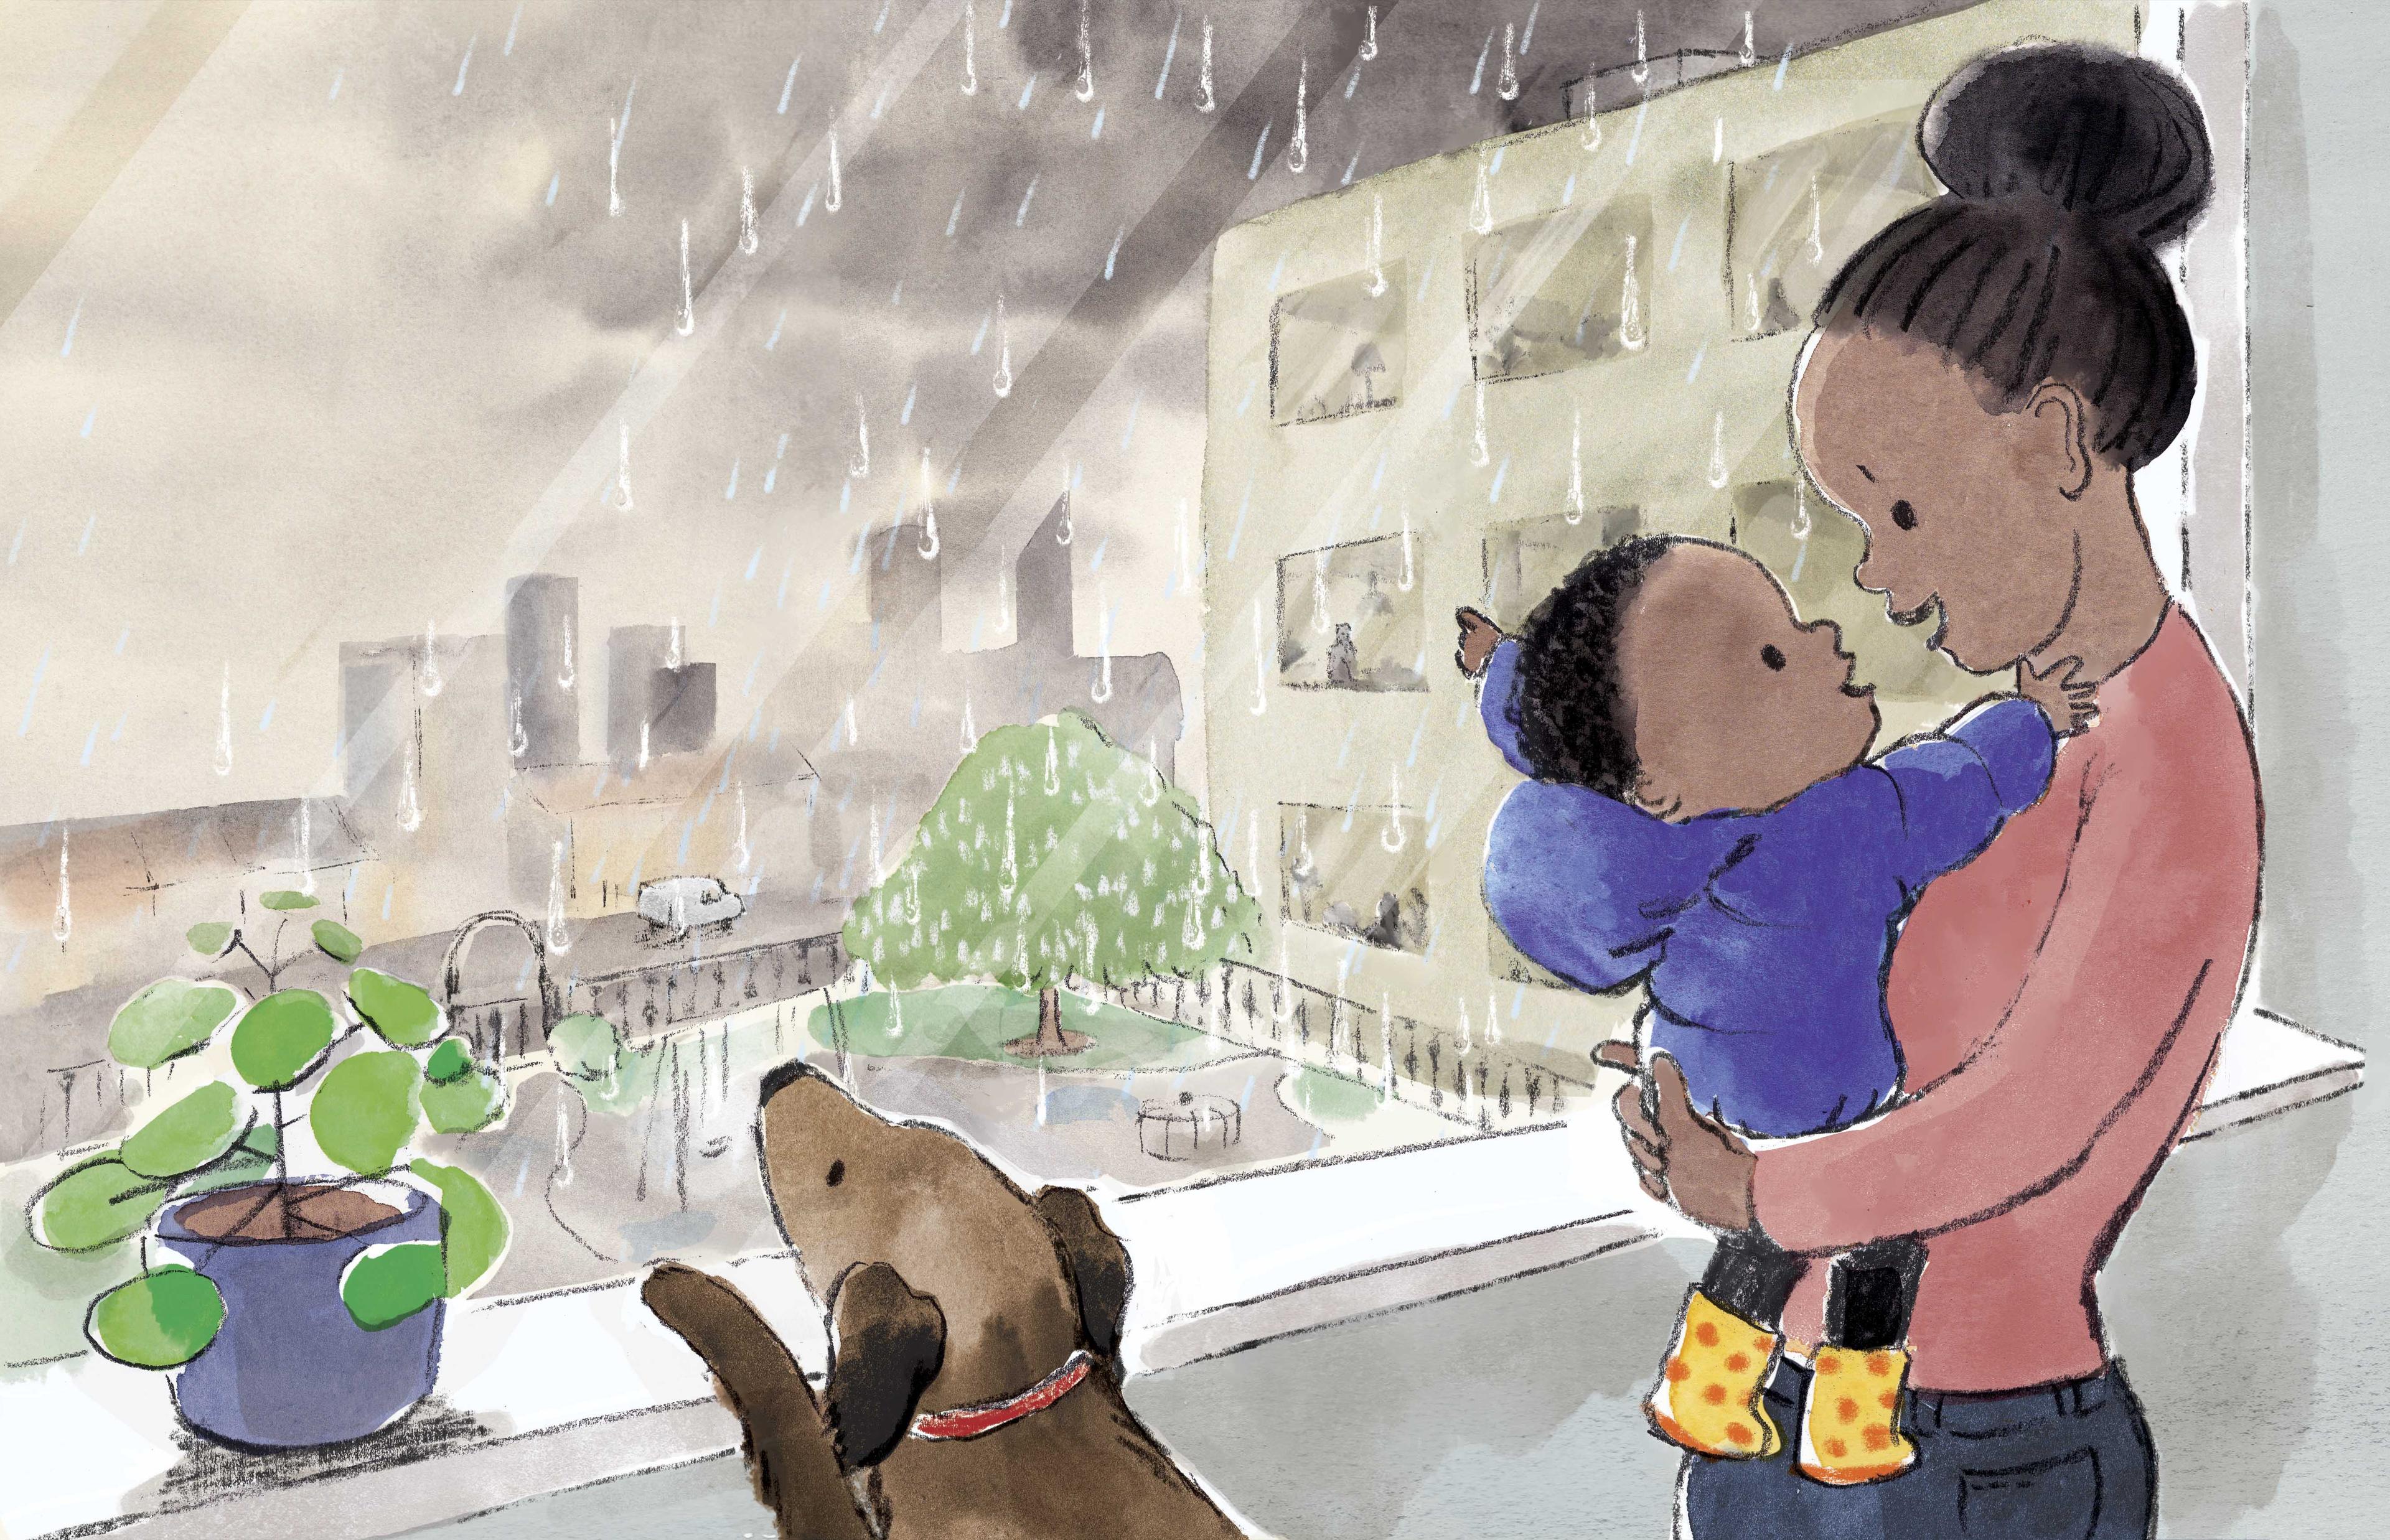 An illustration of a person with a child in their arms, they are by a window and its is raining outside. A dog is looking out of the window.